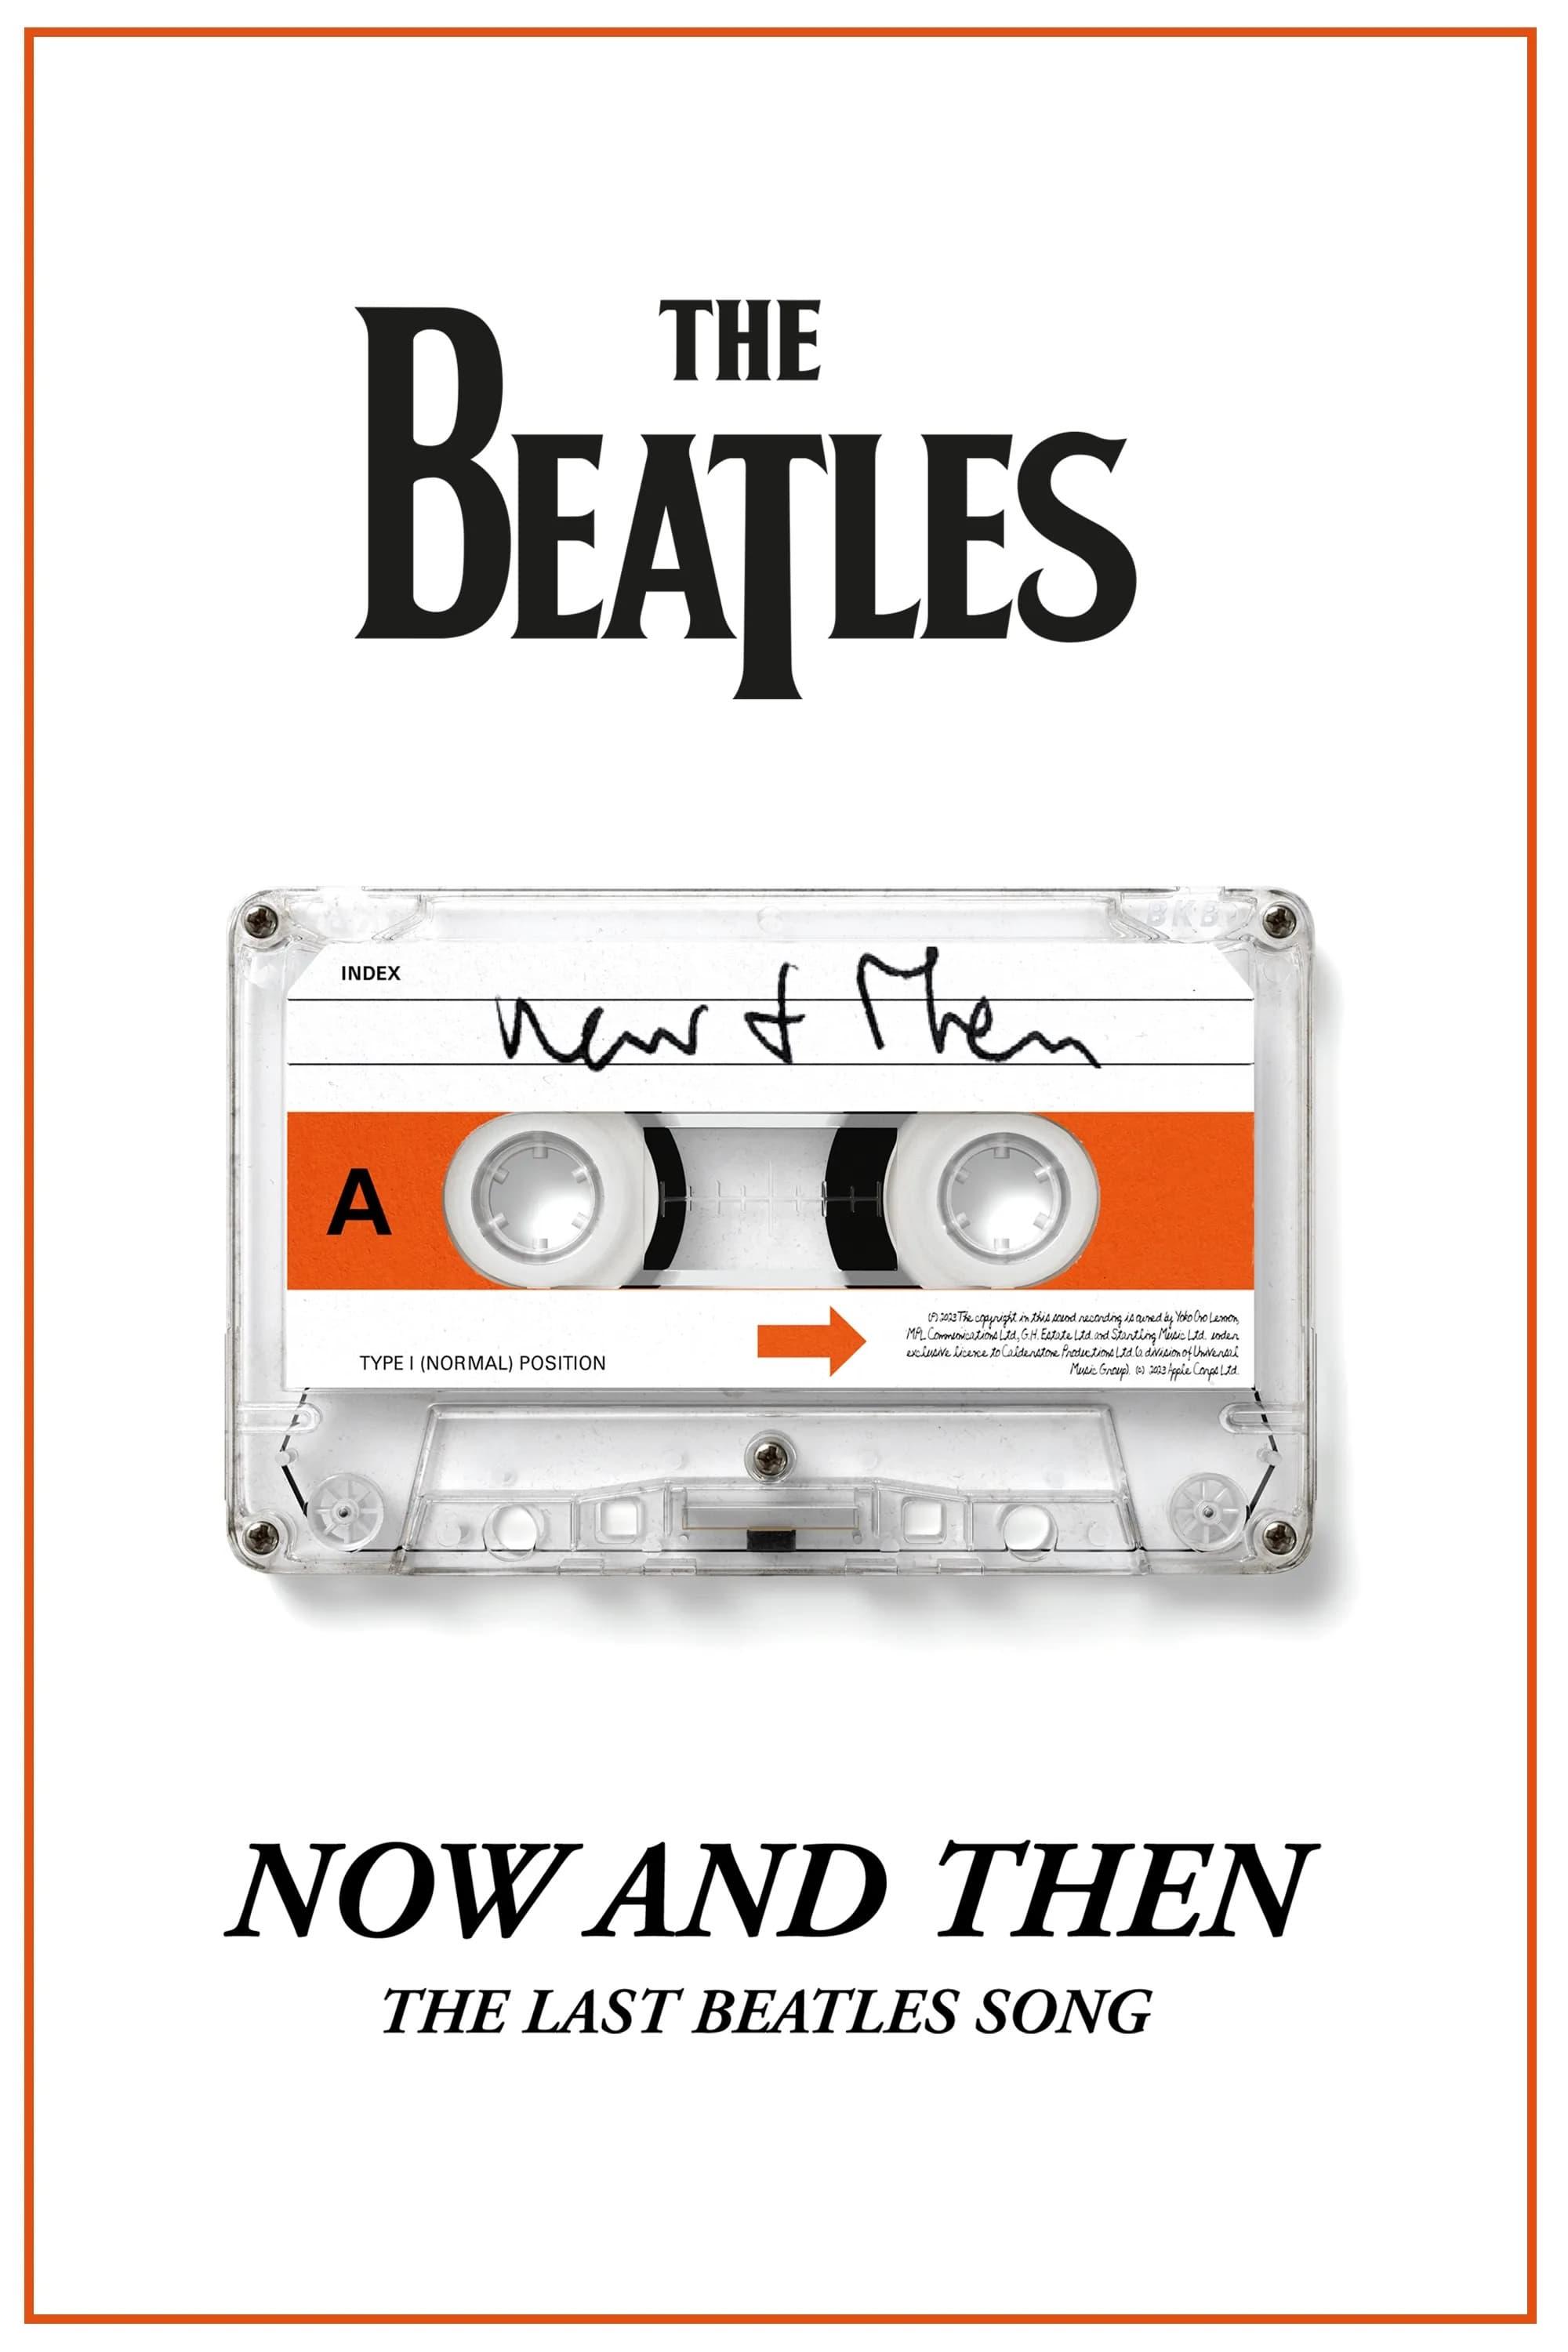 Now and Then - The Last Beatles Song poster